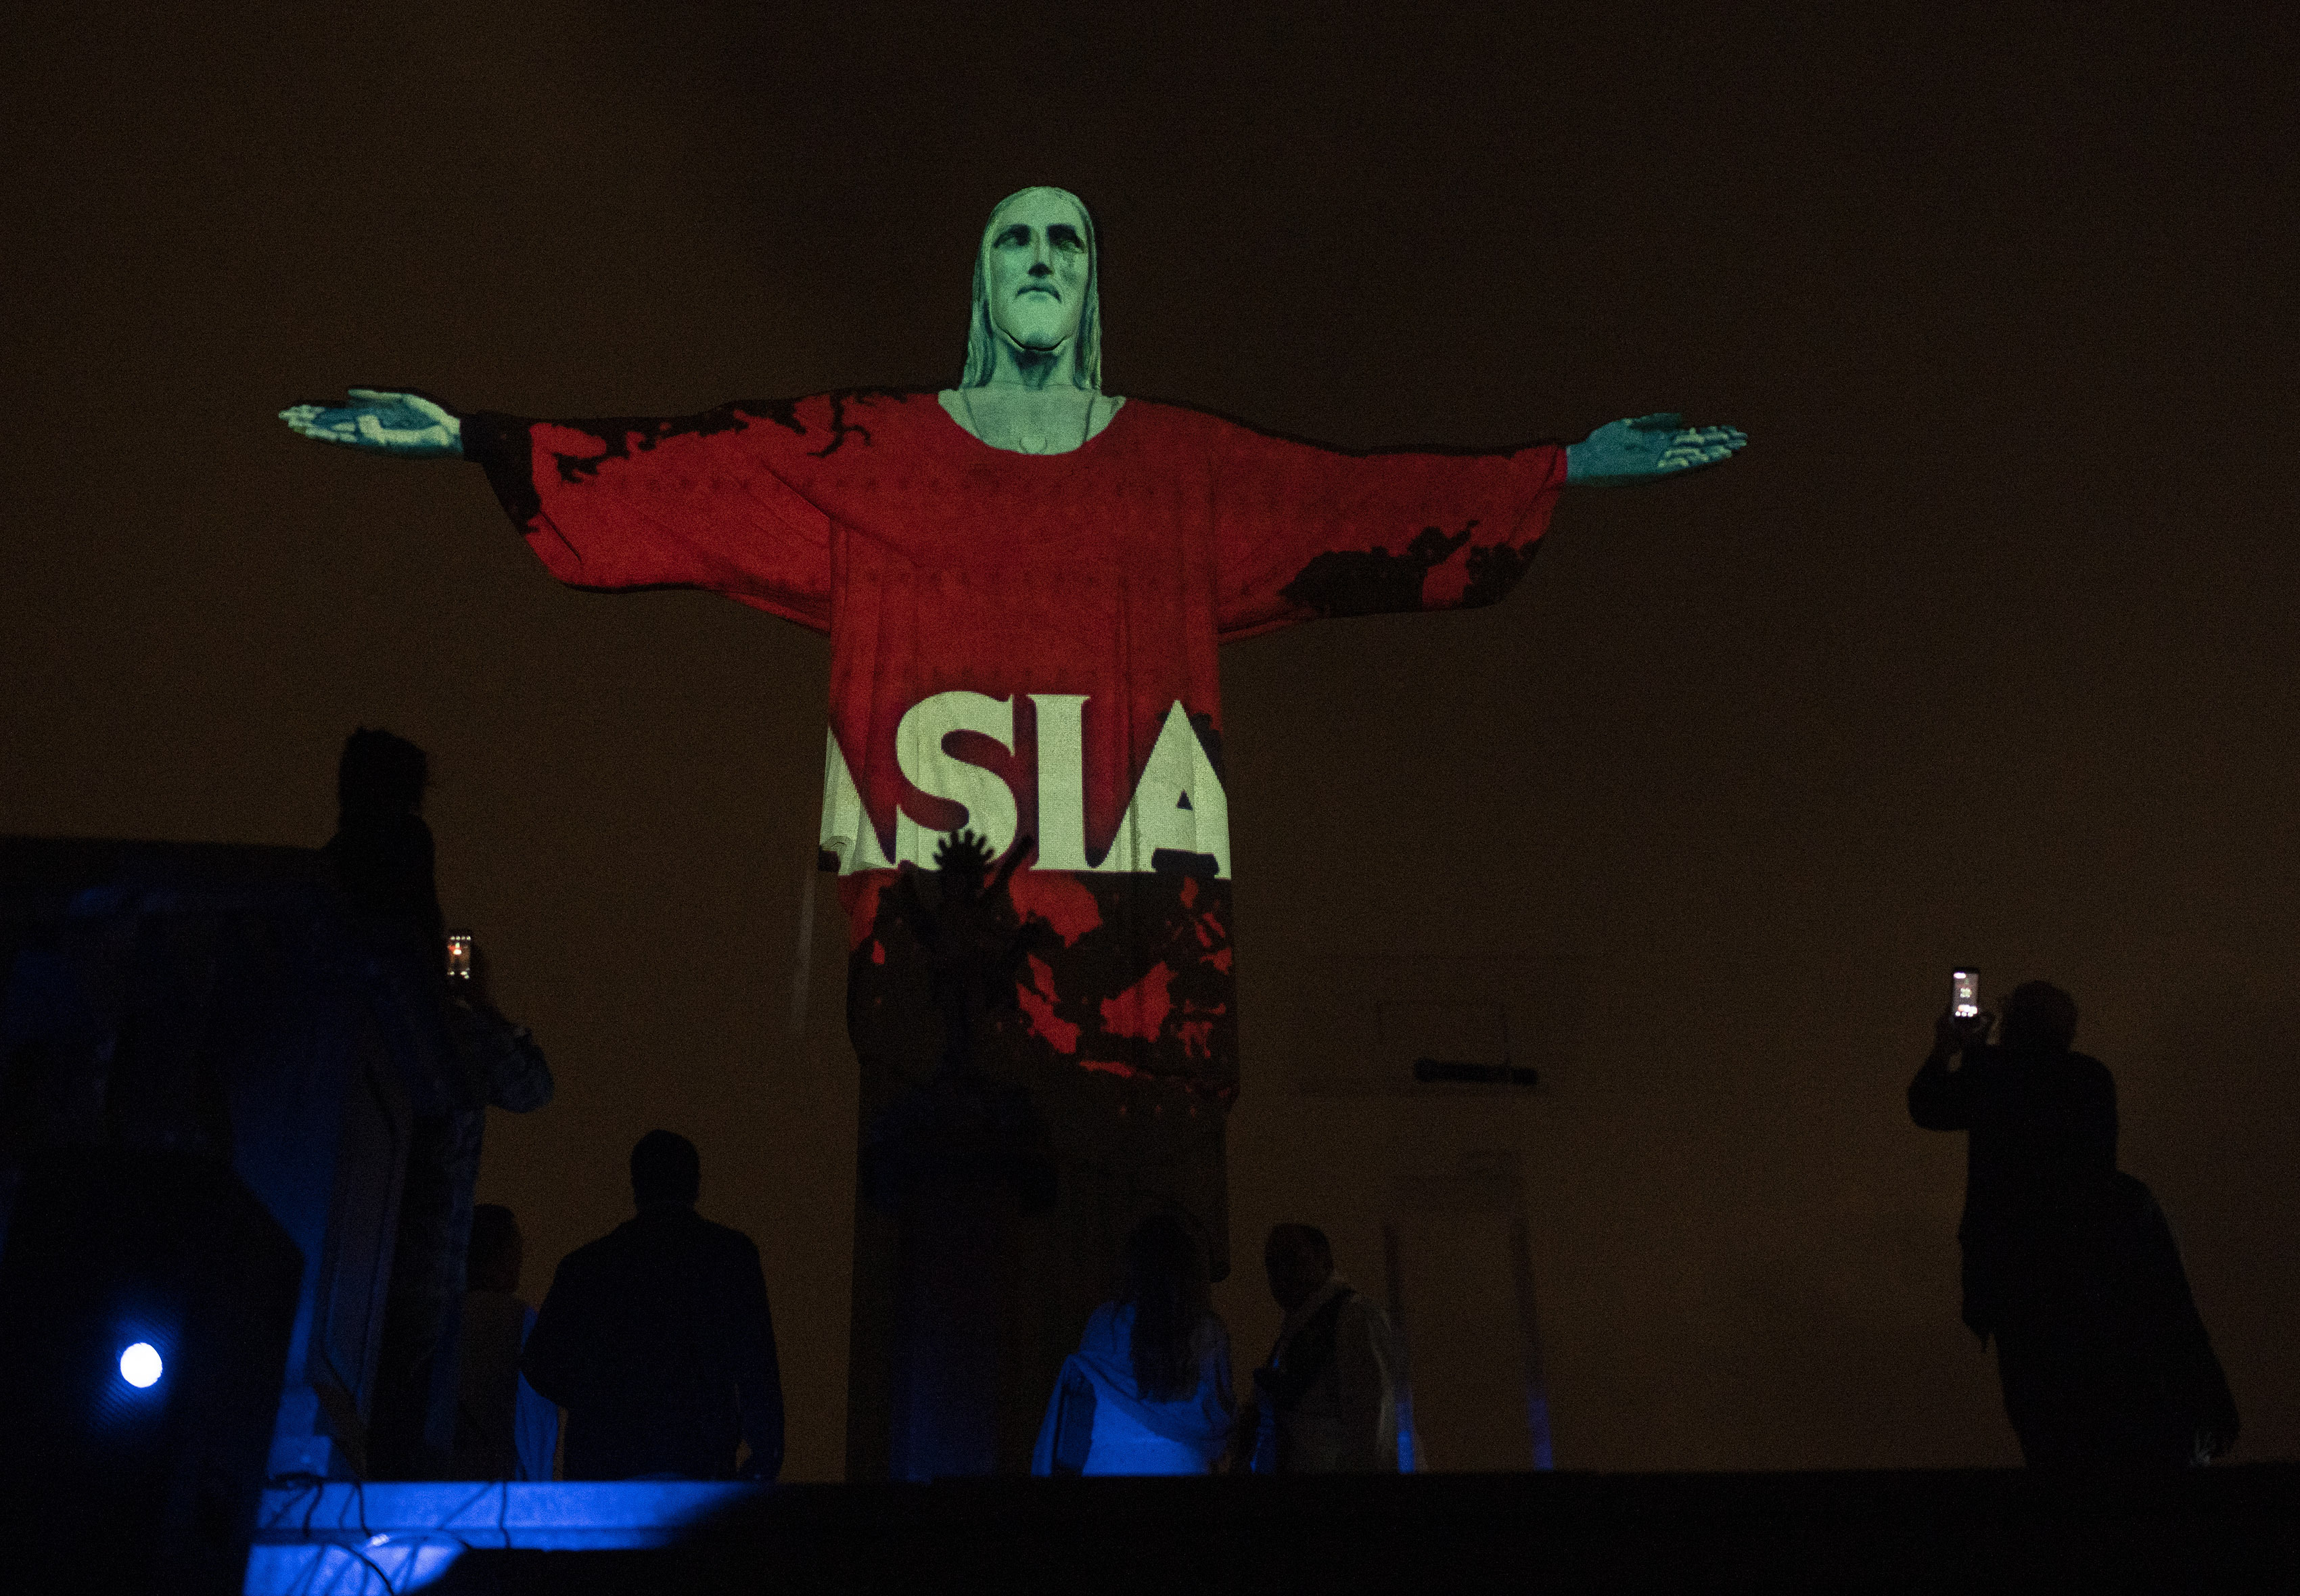 Rio's Christ the Redeemer statue is lit up with the word Asia in support of those afflicted by the new coronavirus, in Rio de Janeiro, Brazil, Wednesday, March 18, 2020. For most people COVID-19 causes mild or moderate symptoms. For others, especially the elderly and people with existing health problems, it can cause many other serious illnesses, including pneumonia. (AP Photo/Silvia Izquierdo)